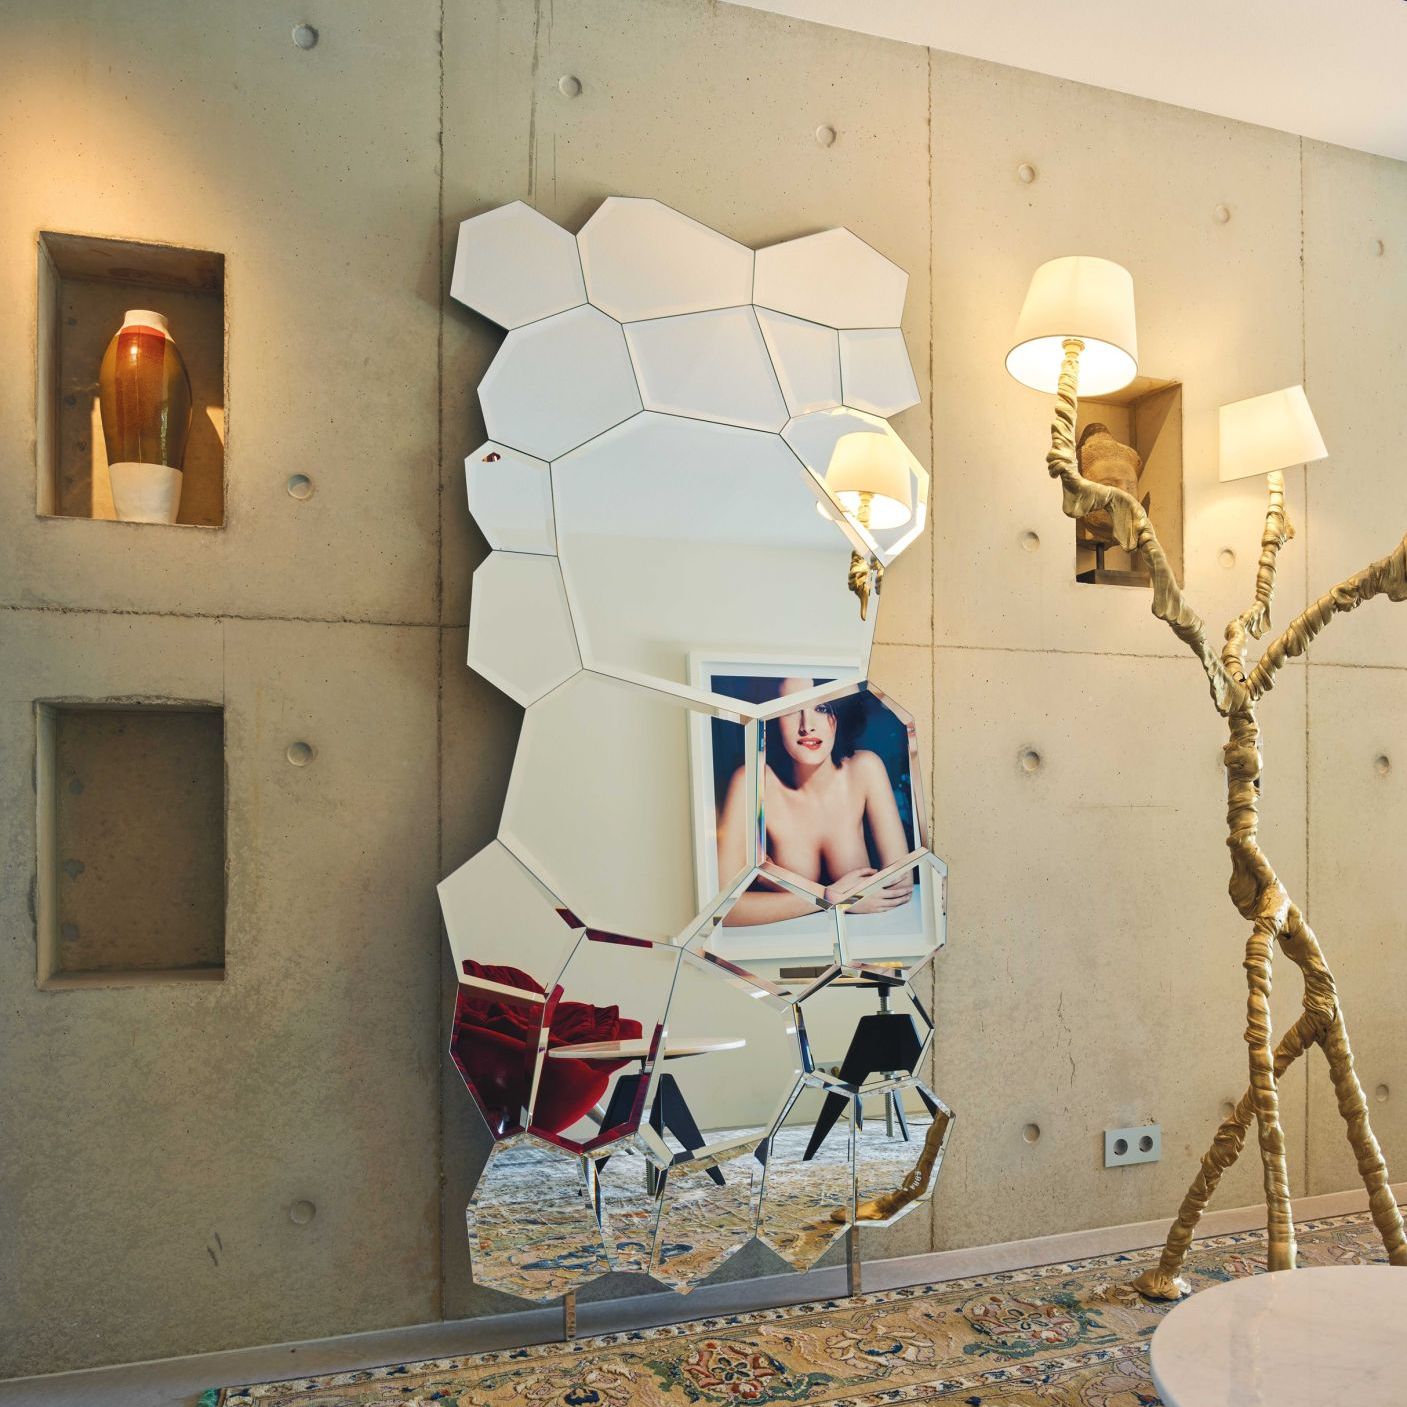   Jubilé.  In a contrast with concrete the mirror’s 25 shapes reflect light, artworks and furnishings. 